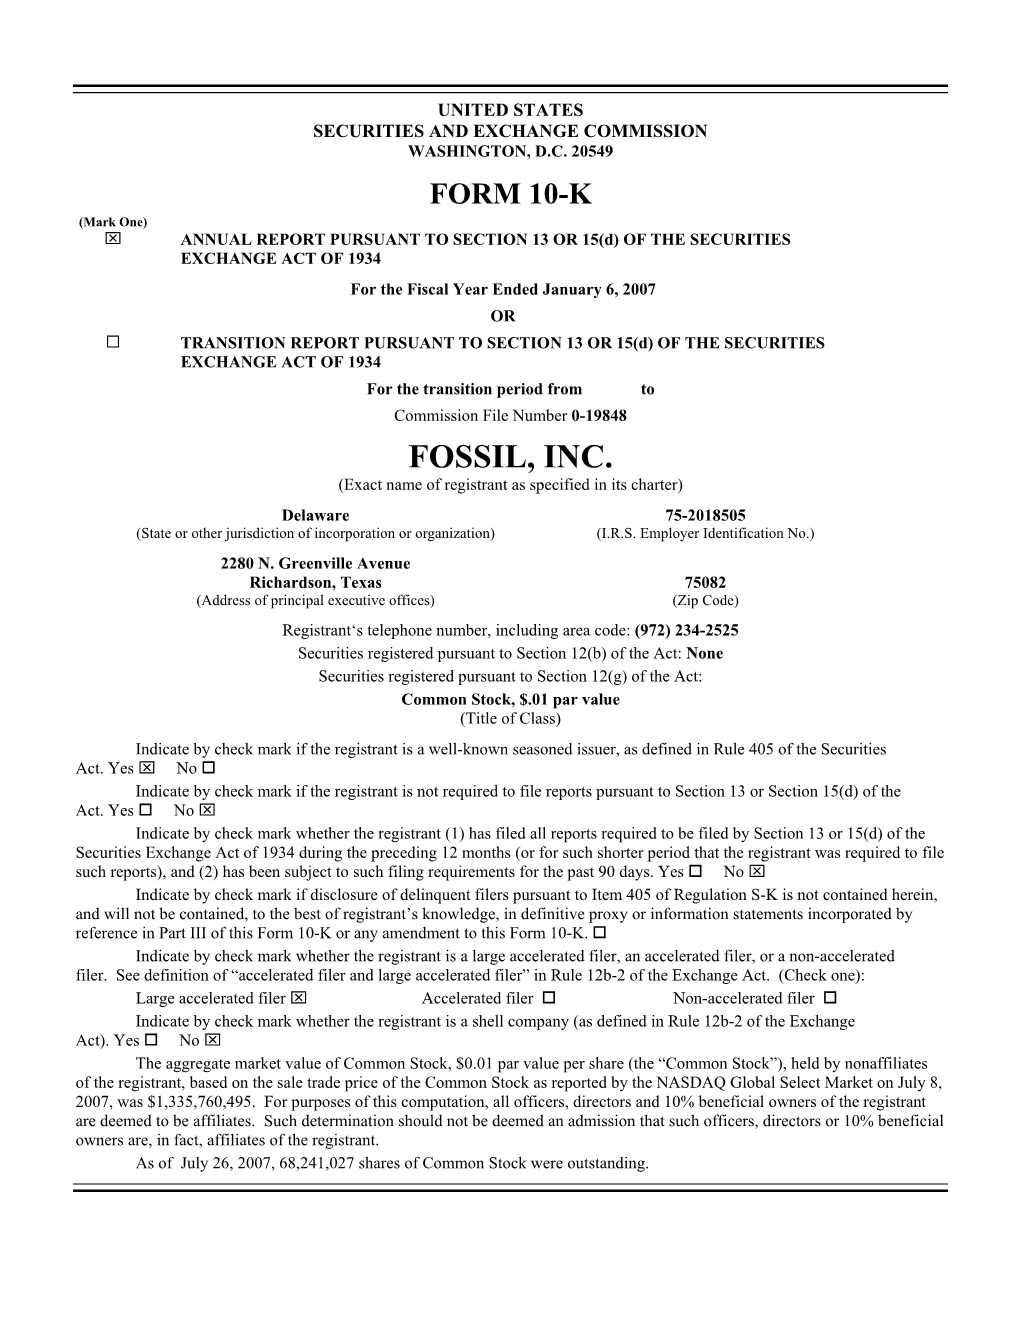 FOSSIL, INC. (Exact Name of Registrant As Specified in Its Charter)